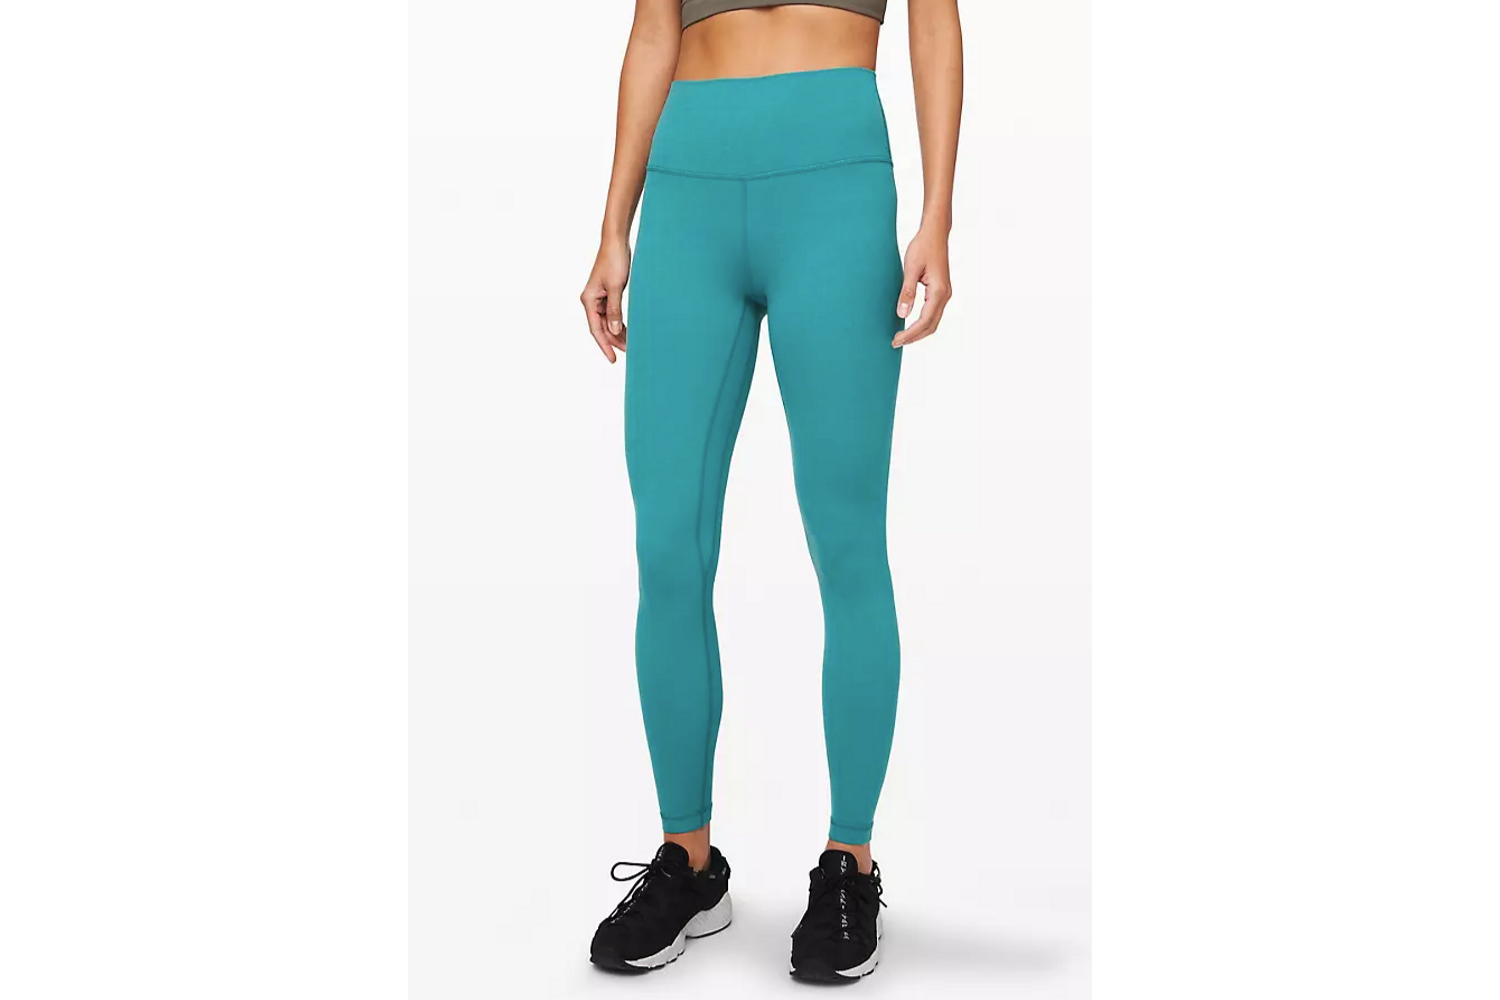 27 Best Workout Clothes for Women Over 50